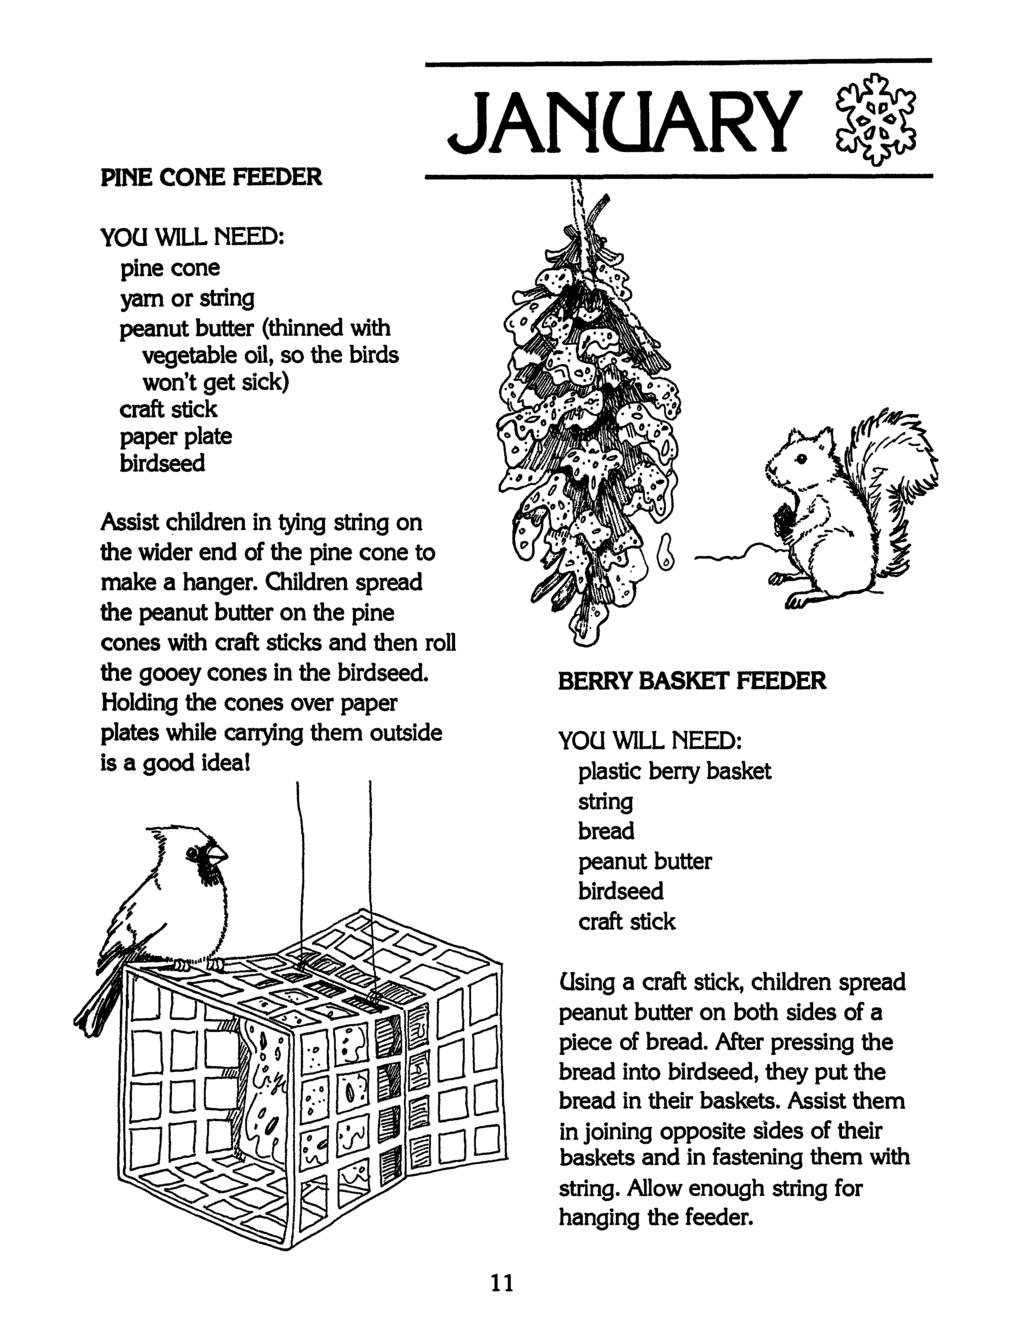 PINE CONE FEEDER JANUARY pine cone yam or string peanut butter (thinned with vegetable oil, so the birds won't get sick) craft stick paper plate birdseed Assist children in tying string on the wider